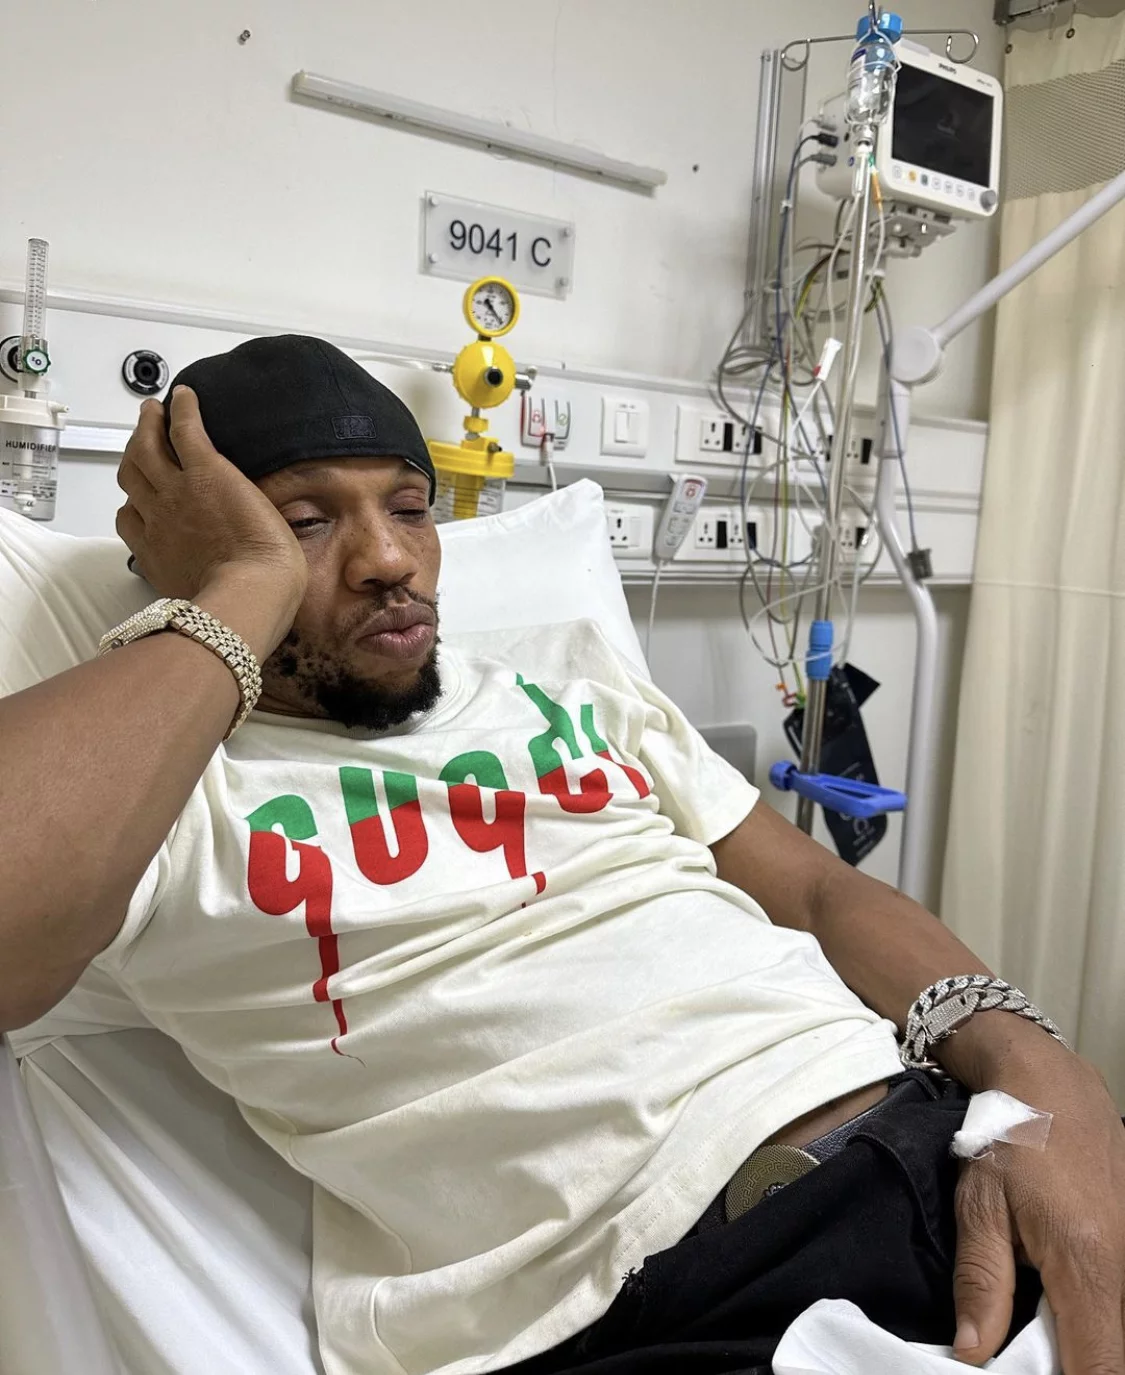 Actor Charles Okocha Survives Ghastly Car Accident